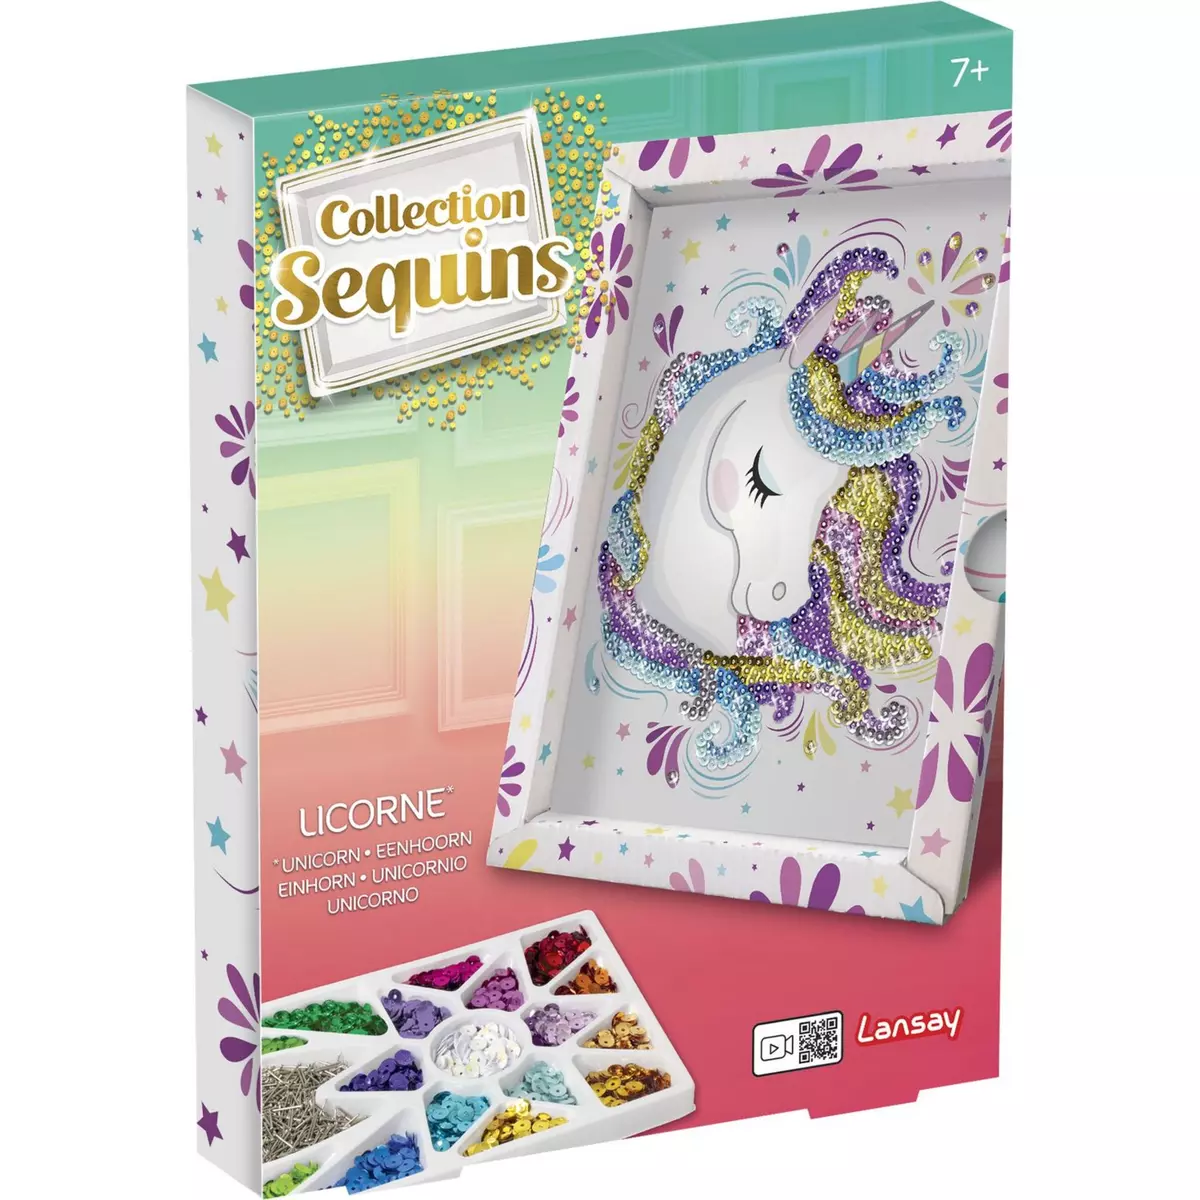 LANSAY Création Collection sequins - Licorne 